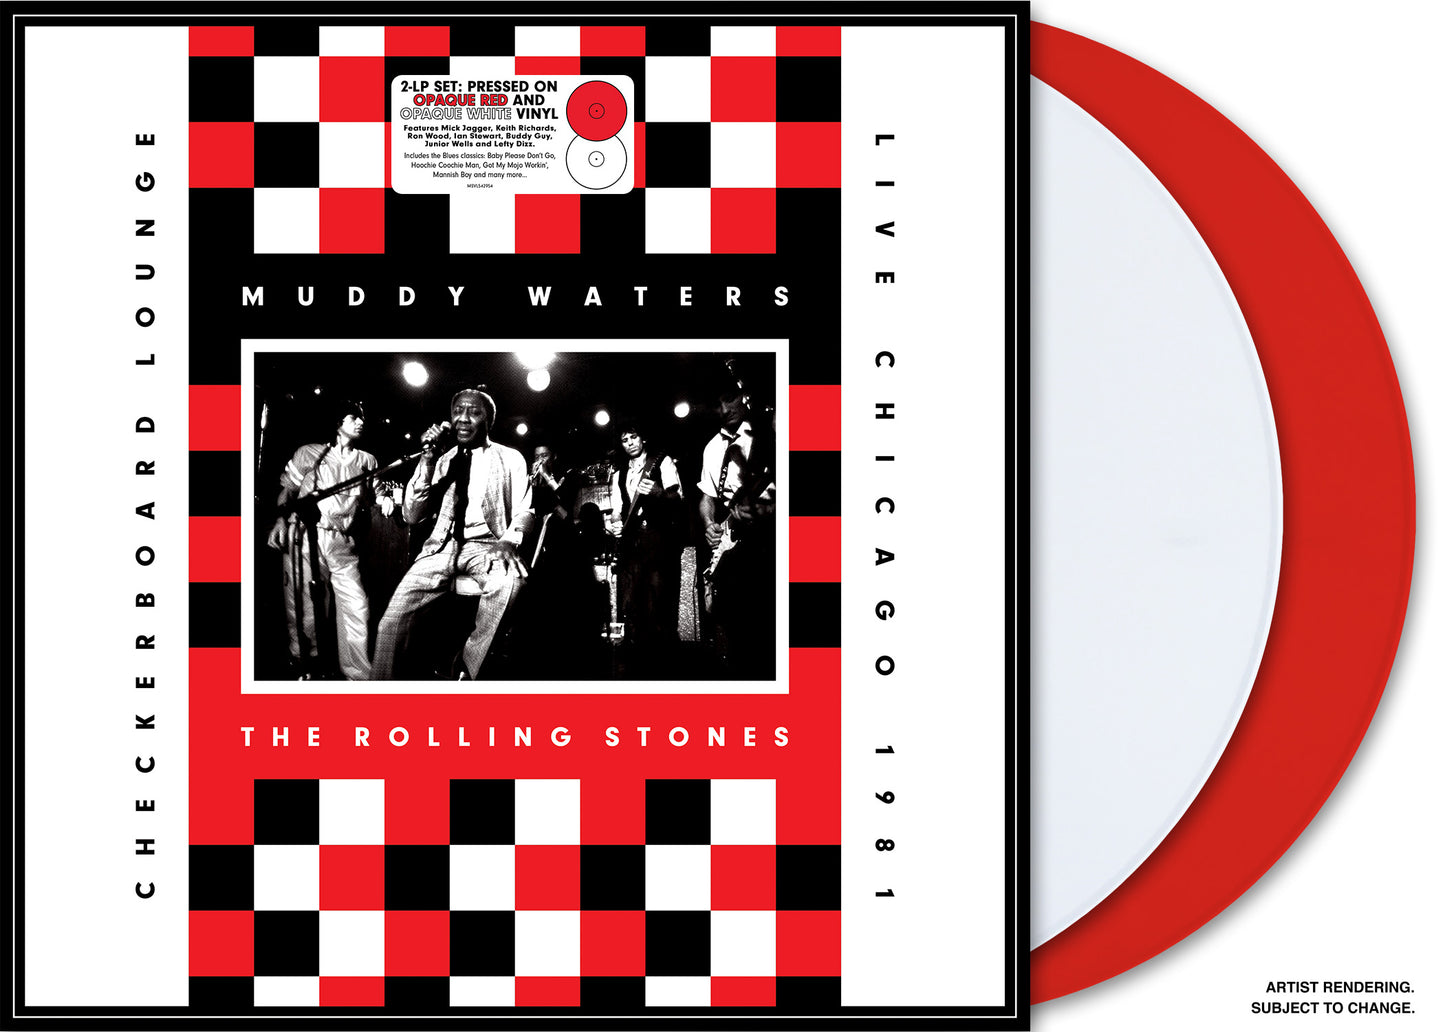 MUDDY WATERS & THE ROLLING STONES Live At The Checkerboard Lounge Chicago 1981 - Limited Edition Vinyl 2LP